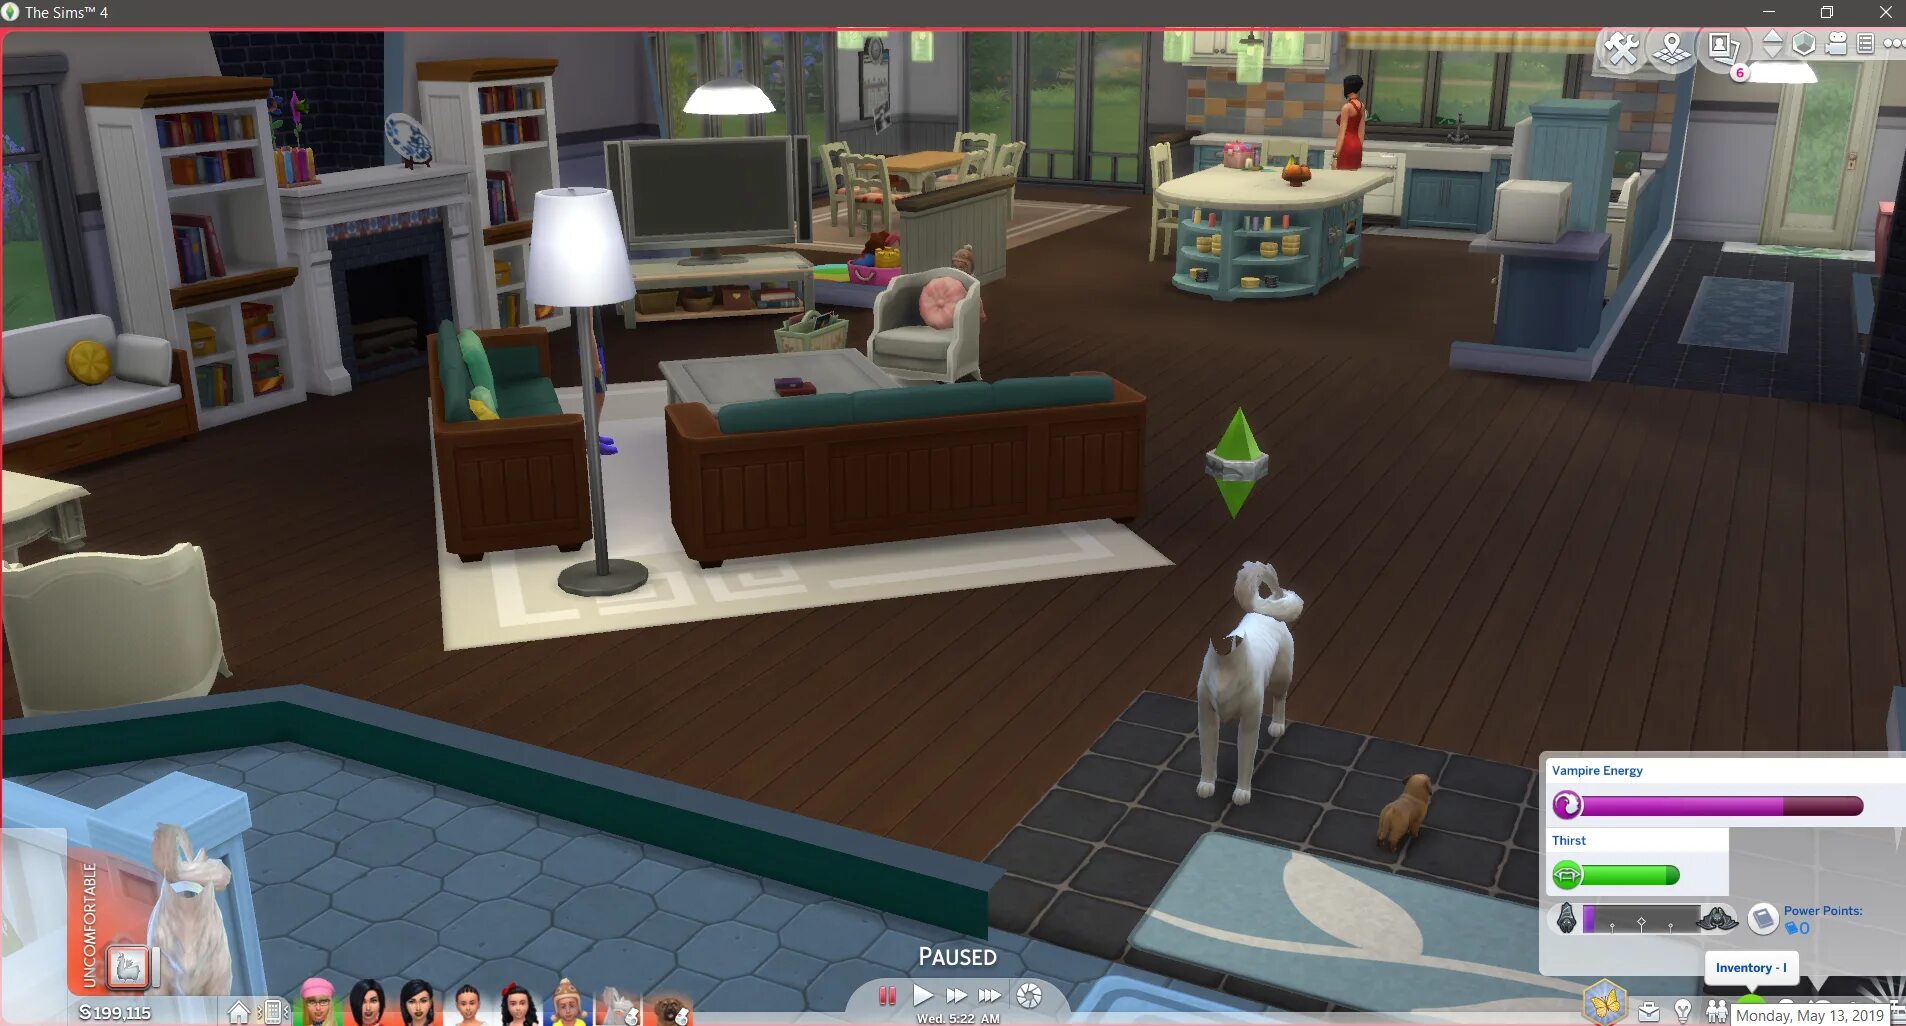 Wicked pets. SIMS Wicked Pets. Викед петс симс 4. SIMS 4 wickedwhims Pets. Wicked Pets SIMS 4 анимации.